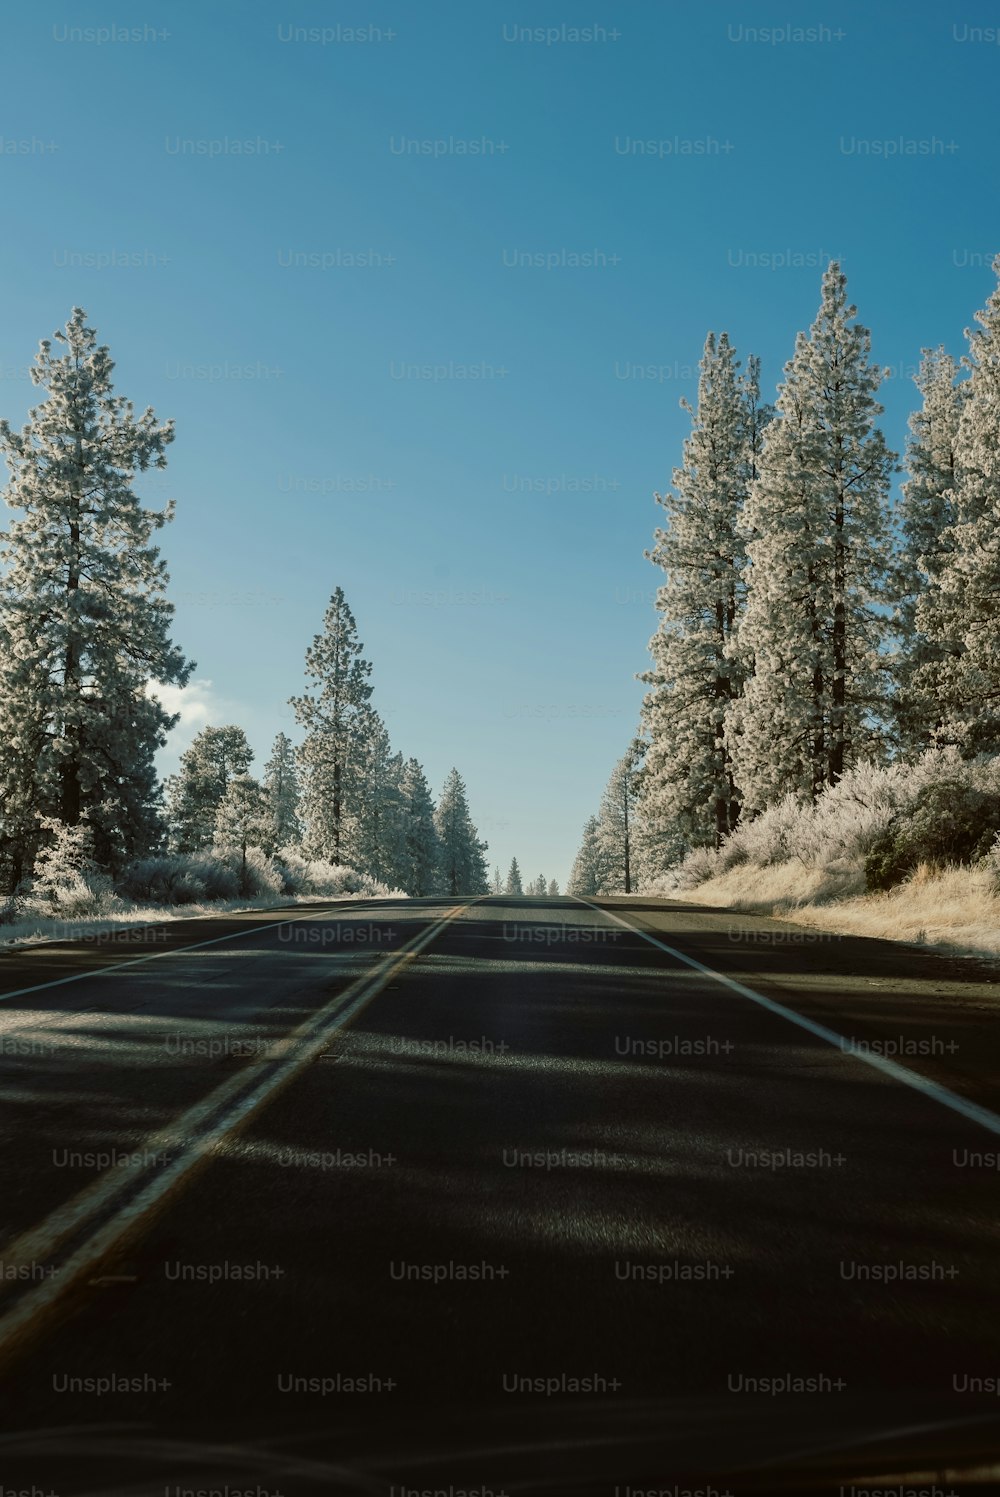 a road with trees on both sides and snow on the ground